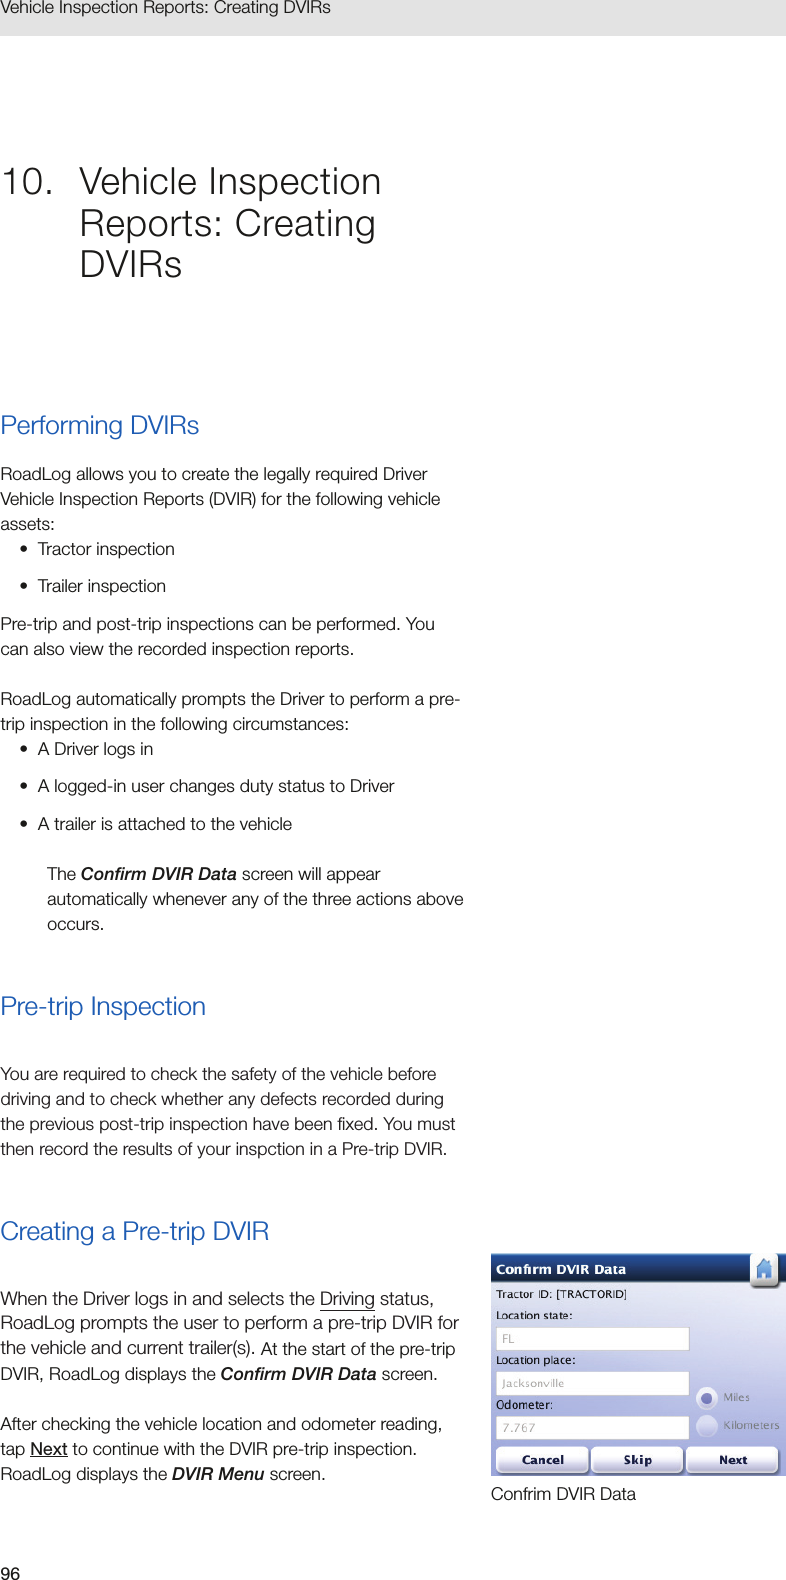 96Vehicle Inspection Reports: Creating DVIRs 10.  Vehicle Inspection Reports: Creating DVIRsPerforming DVIRsRoadLog allows you to create the legally required Driver Vehicle Inspection Reports (DVIR) for the following vehicle assets: •  Tractor inspection•  Trailer inspectionPre-trip and post-trip inspections can be performed. You can also view the recorded inspection reports.RoadLog automatically prompts the Driver to perform a pre-trip inspection in the following circumstances:•  A Driver logs in•  A logged-in user changes duty status to Driver•  A trailer is attached to the vehicleThe Confirm DVIR Data screen will appear automatically whenever any of the three actions above occurs.Pre-trip InspectionYou are required to check the safety of the vehicle before driving and to check whether any defects recorded during the previous post-trip inspection have been fixed. You must then record the results of your inspction in a Pre-trip DVIR.Creating a Pre-trip DVIRWhen the Driver logs in and selects the Driving status, RoadLog prompts the user to perform a pre-trip DVIR for the vehicle and current trailer(s). At the start of the pre-trip DVIR, RoadLog displays the Confirm DVIR Data screen. After checking the vehicle location and odometer reading, tap Next to continue with the DVIR pre-trip inspection. RoadLog displays the DVIR Menu screen.Confrim DVIR Data